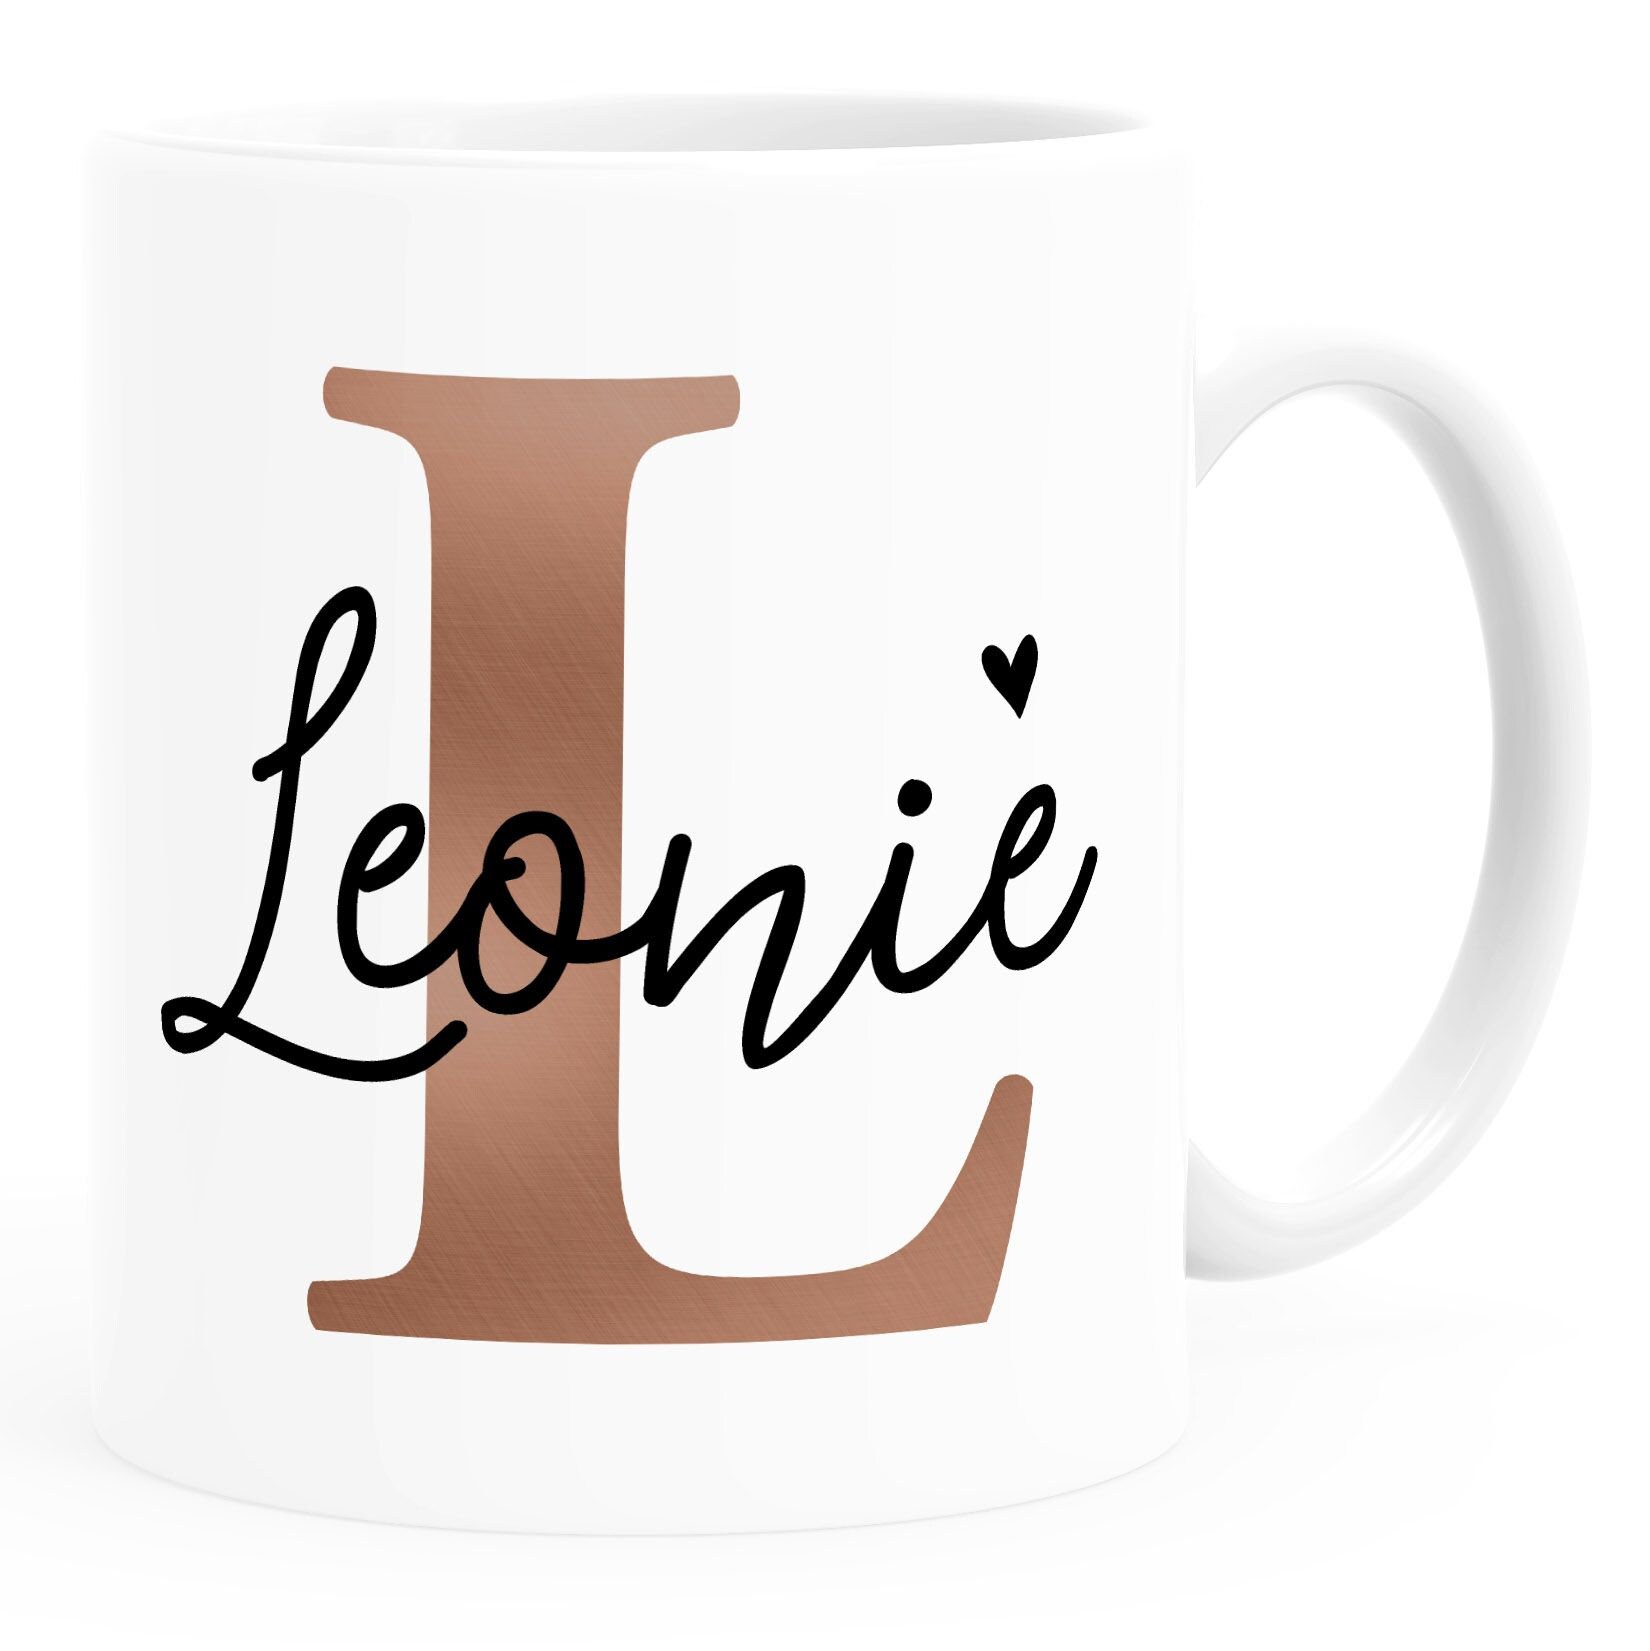 Bear Printed Creative Enamel Cup Custom Letter with Name Coffee